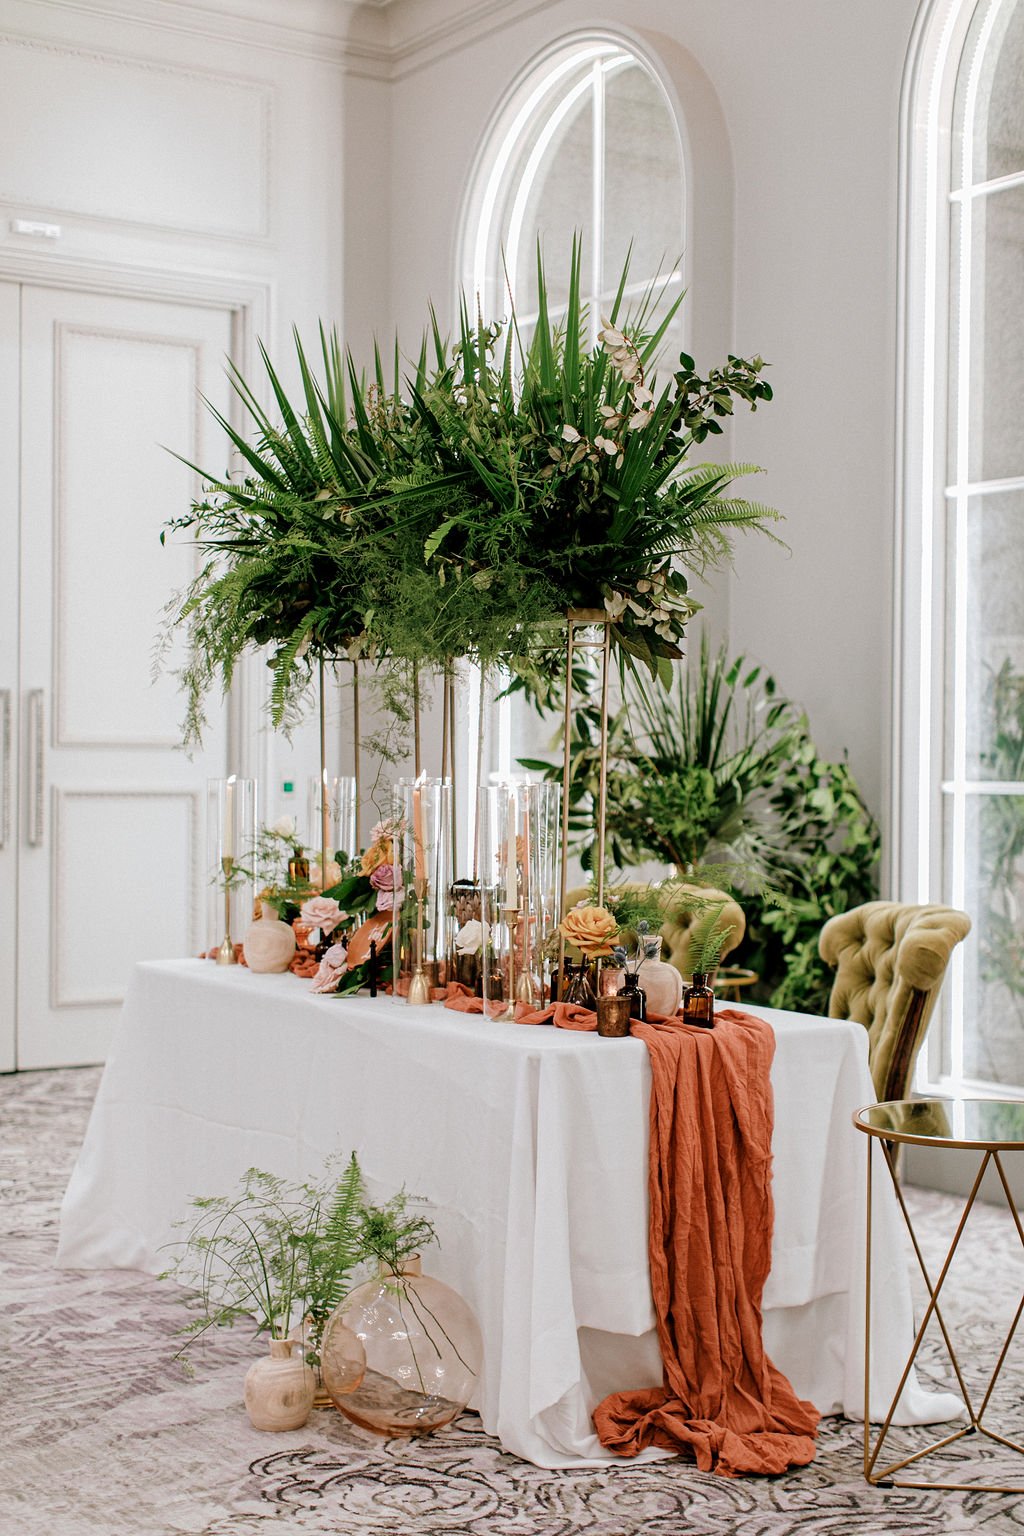 5-things-to-know-before-booking-your-wedding-florist-brought-to-you-by-savannah-wedding-planner-and-savannah-florist-ivory-and-beau-savannah-plant-riverside-district-savannah-wedding-savannah-bridal-shop-maggie-sottero-made-wiith-love-bridal-12.jpg